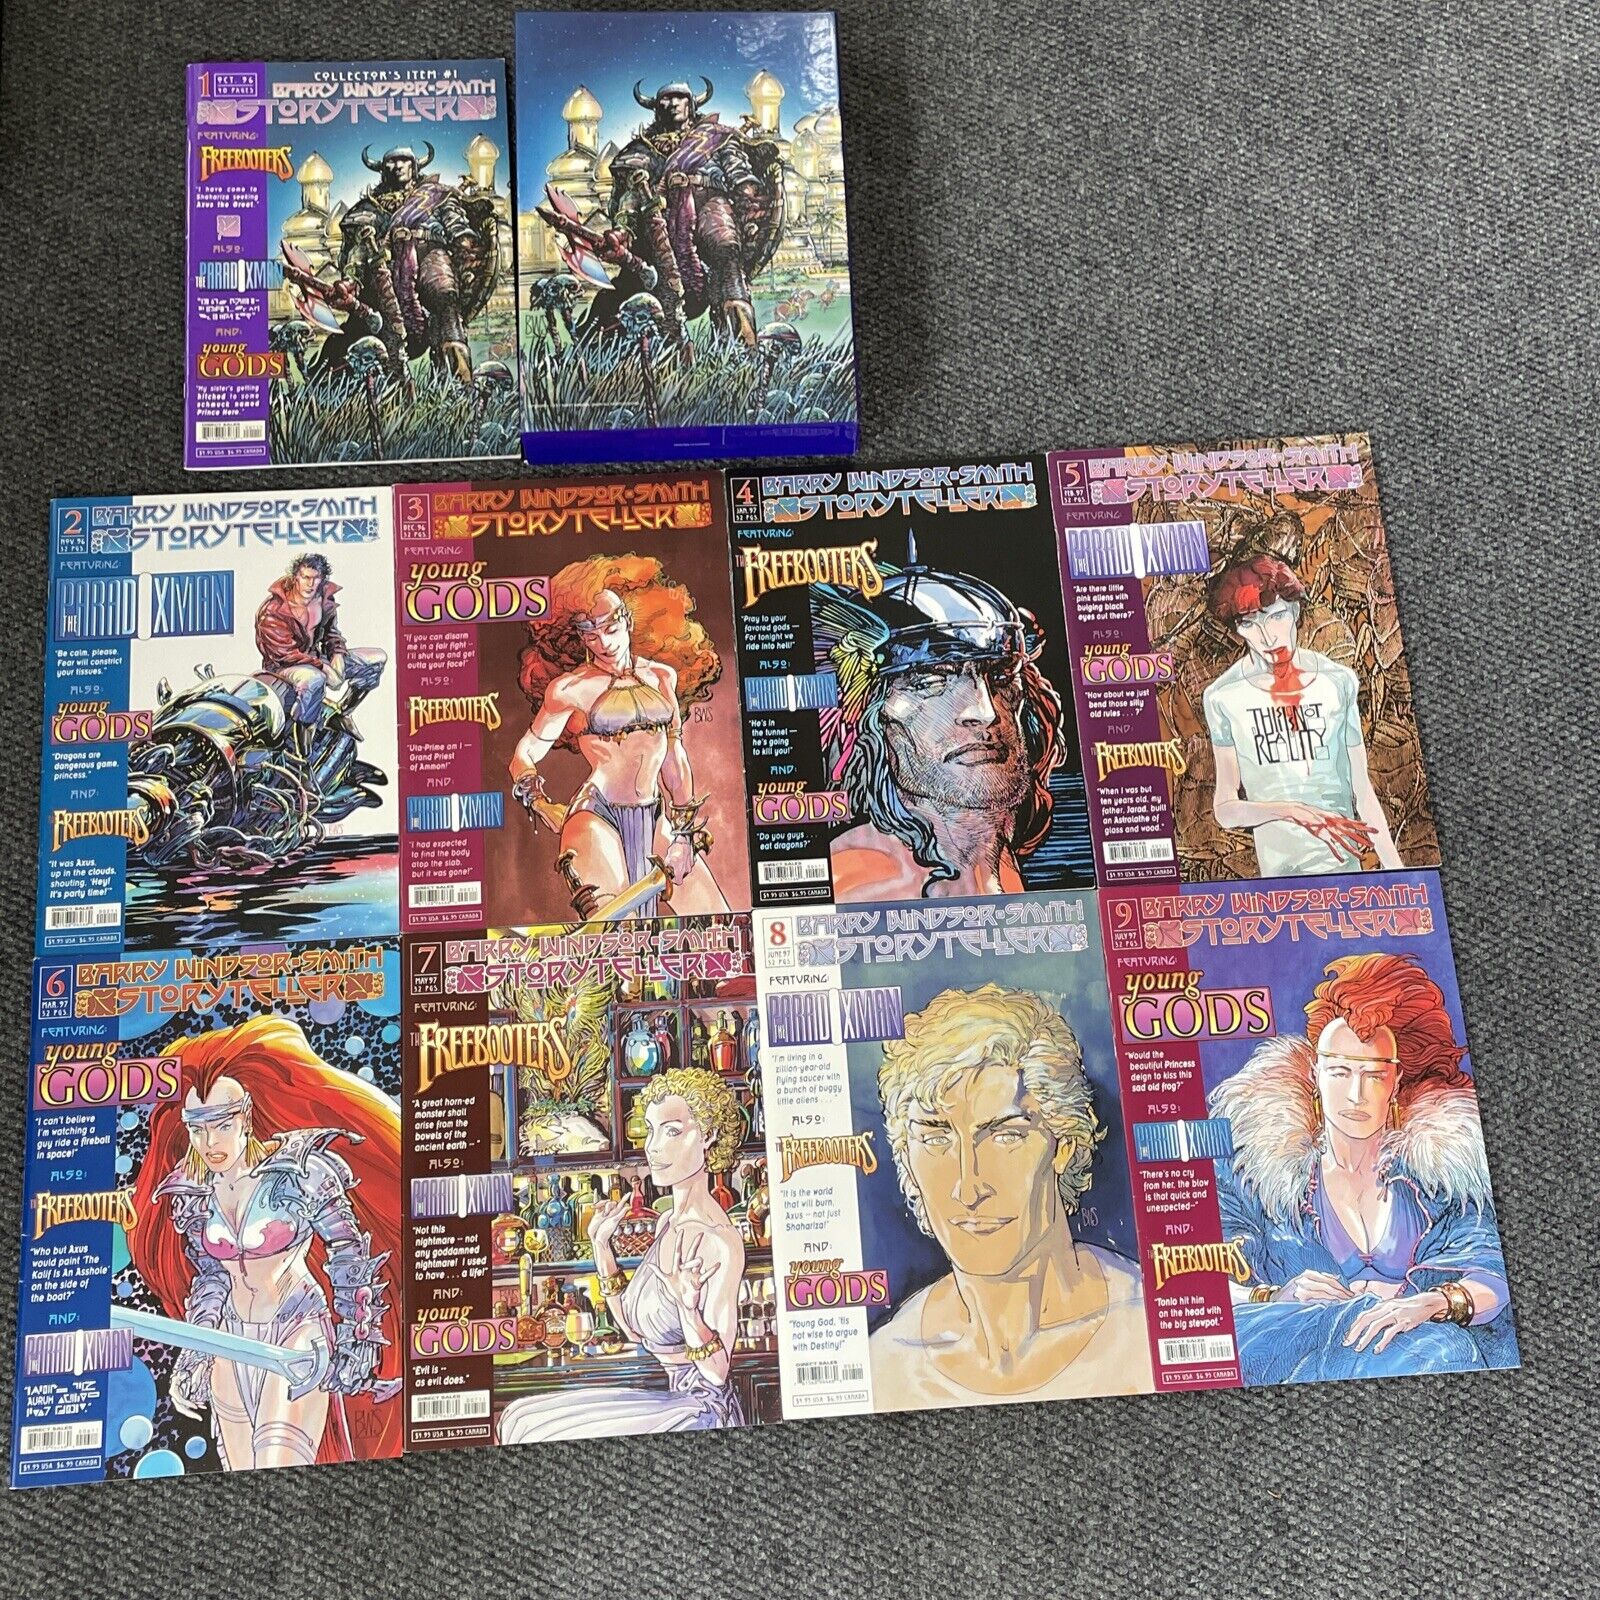 BARRY WINDSOR-SMITH STORYTELLERS #1-9 (1996) WITH CASE VERY GOOD CONDITION